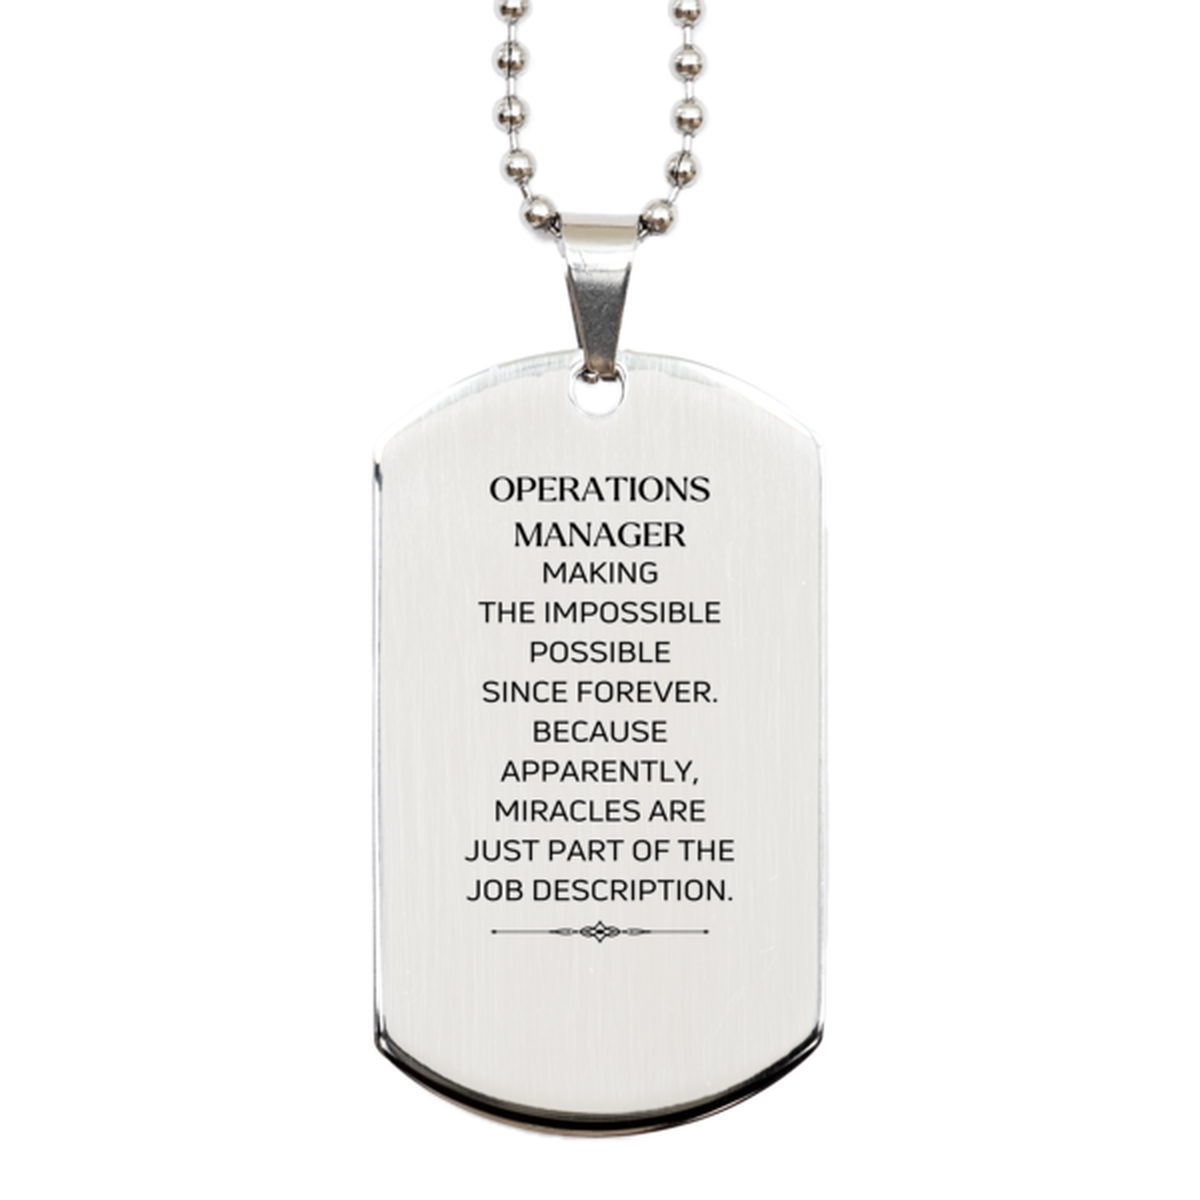 Funny Operations Manager Gifts, Miracles are just part of the job description, Inspirational Birthday Silver Dog Tag For Operations Manager, Men, Women, Coworkers, Friends, Boss